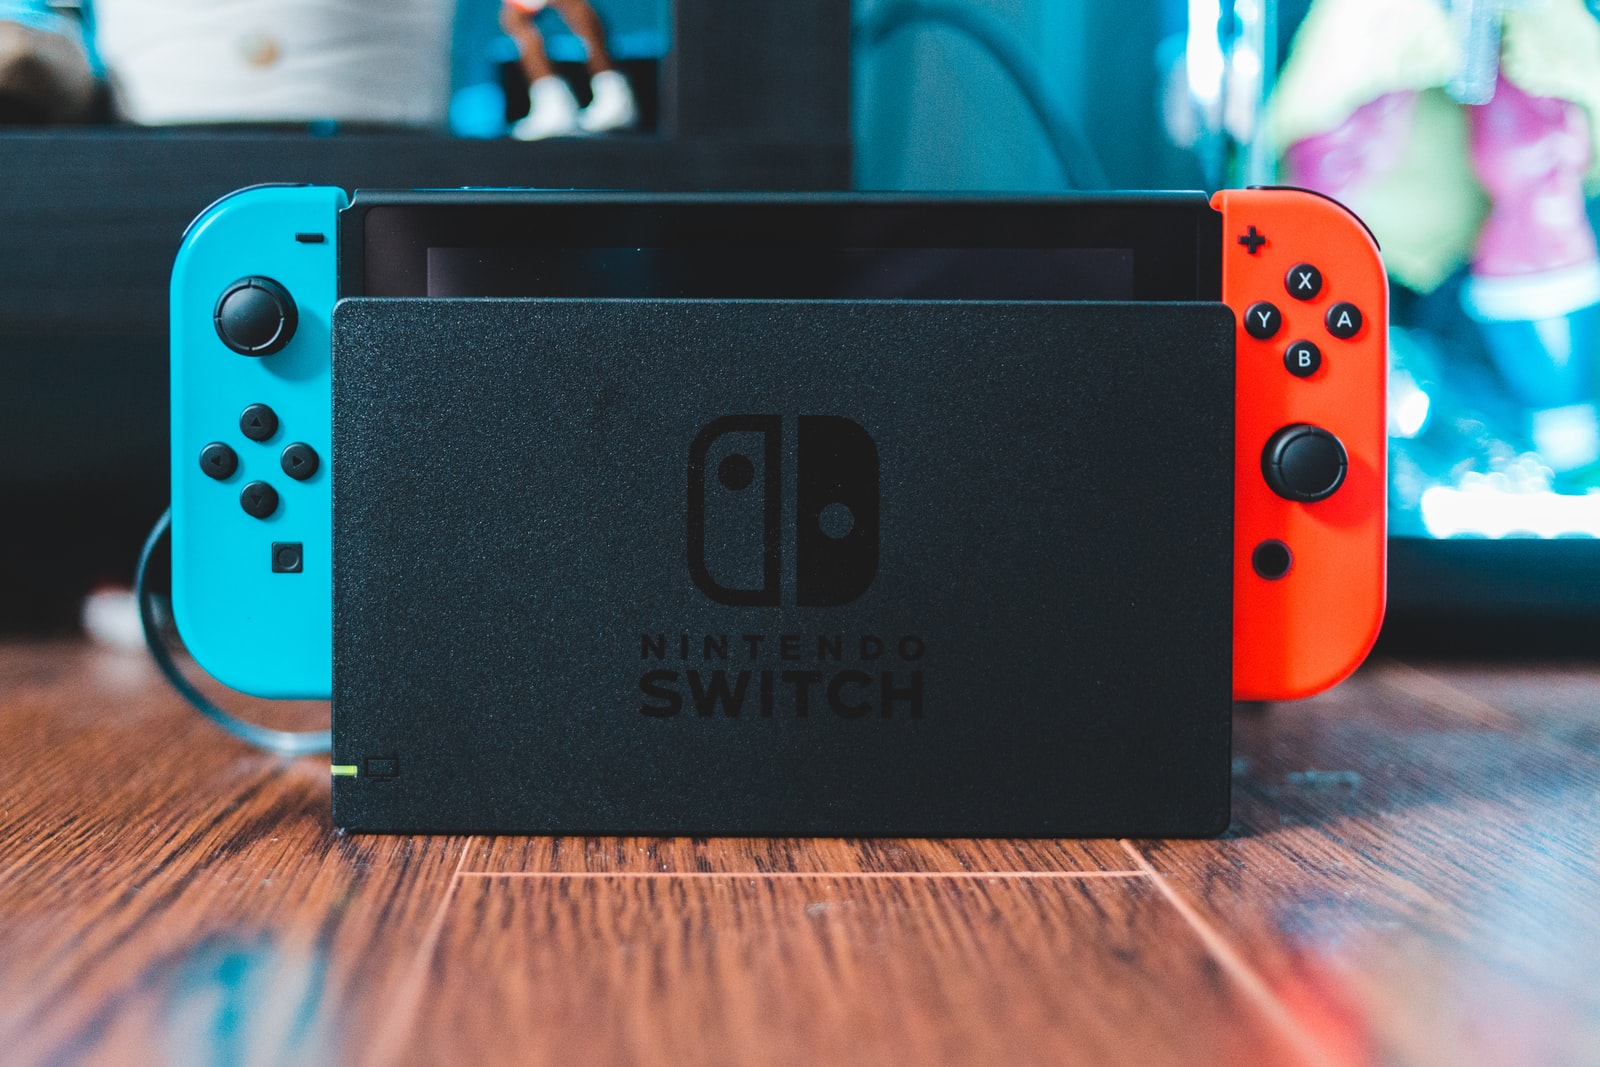 The strange and curious secret behind the success of Nintendo Switch